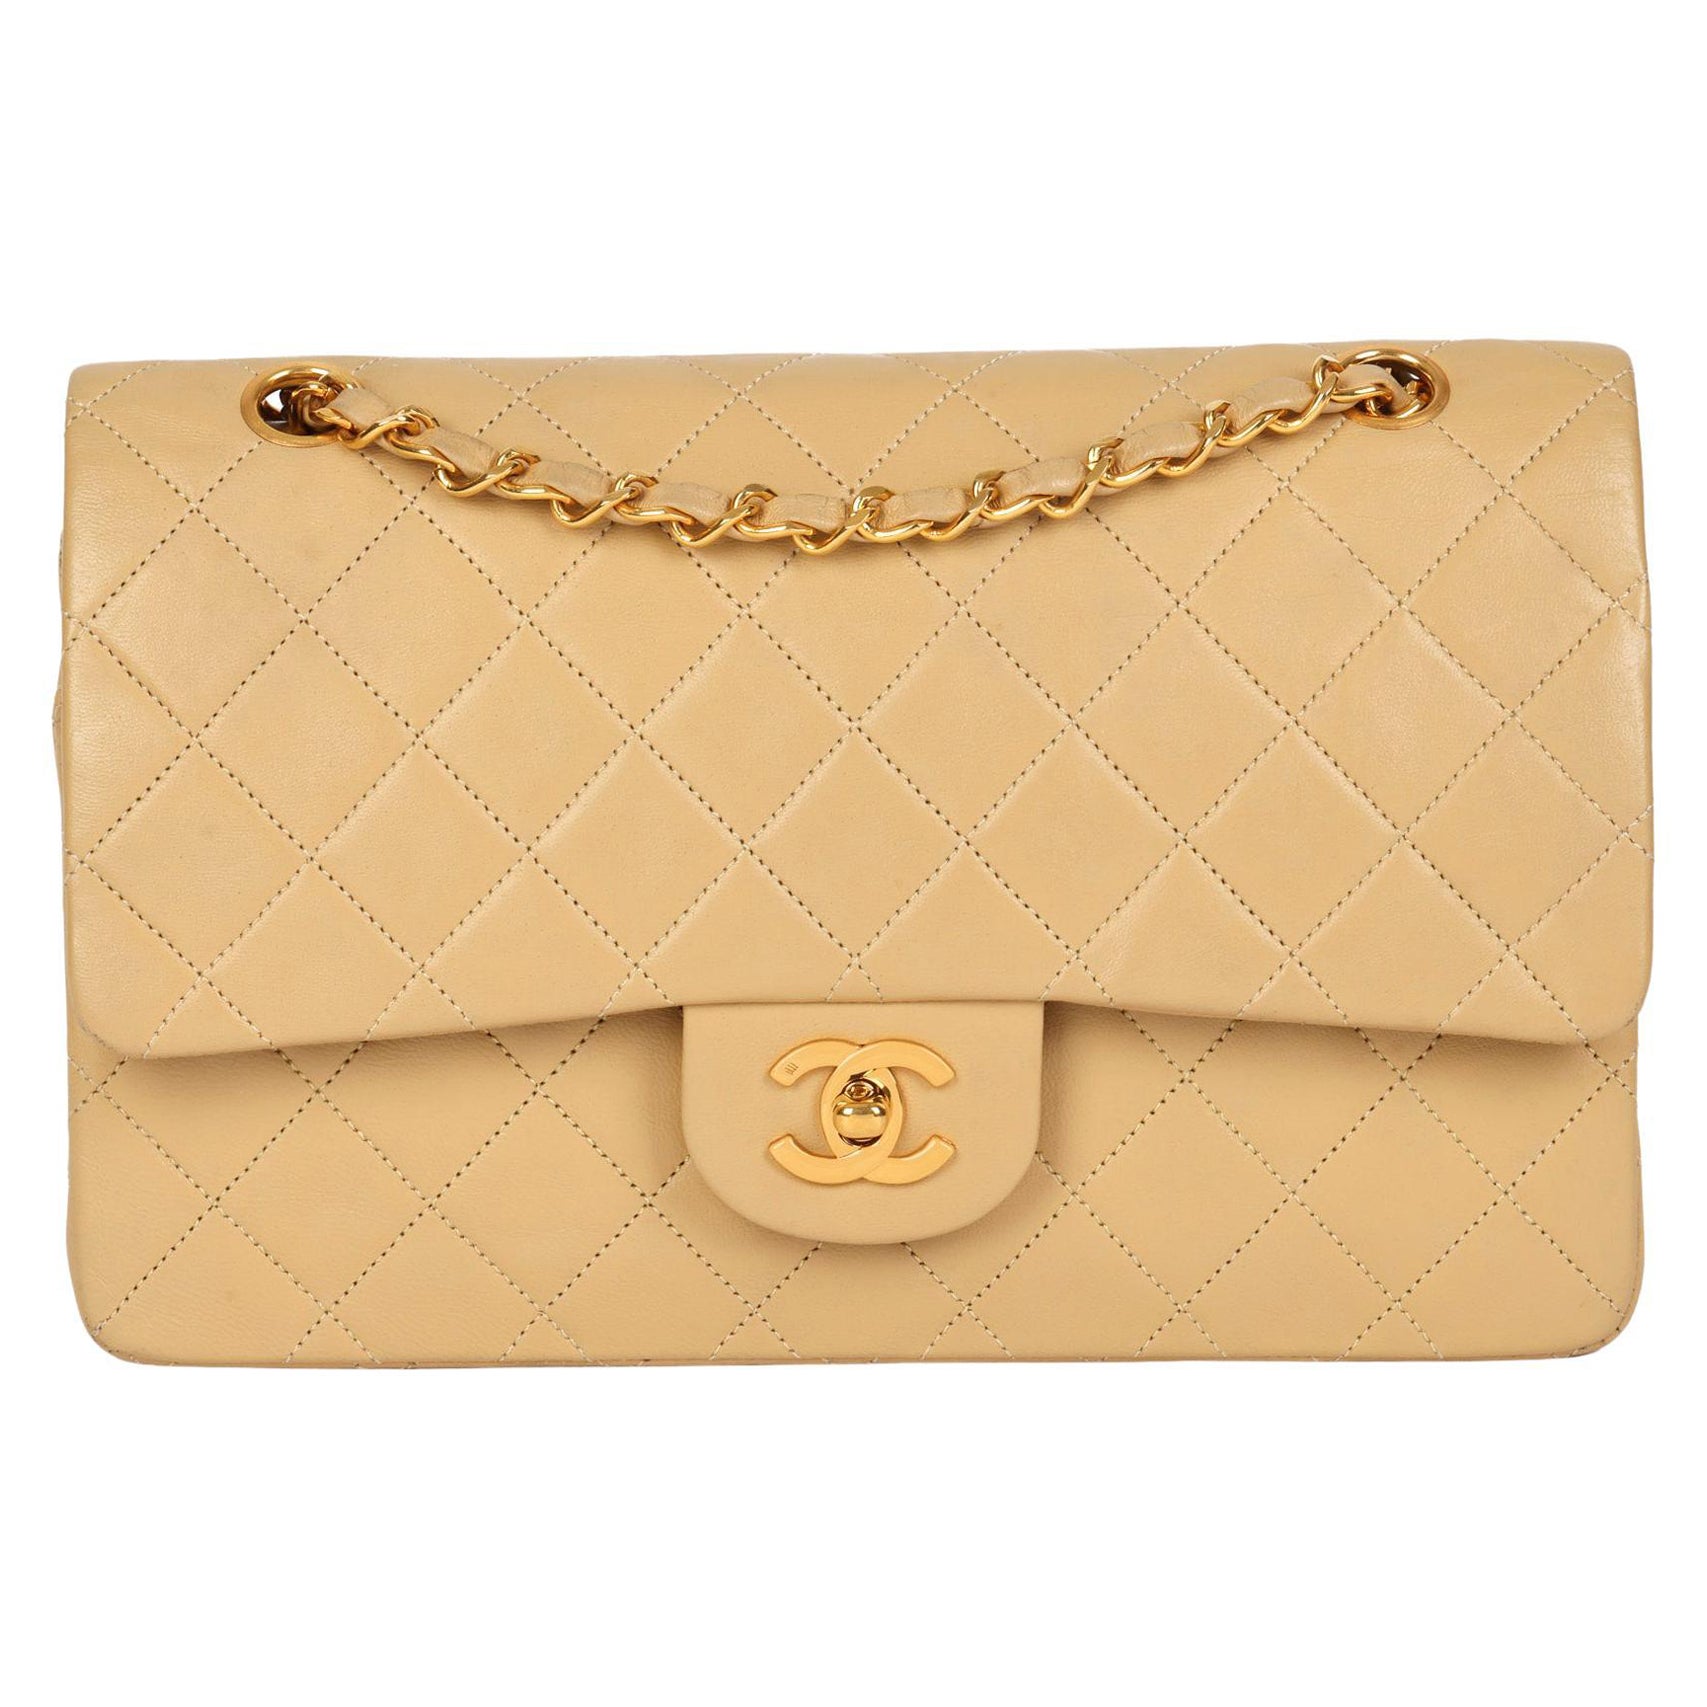 CHANEL Beige Quilted Lambskin Vintage Medium Classic Double Flap